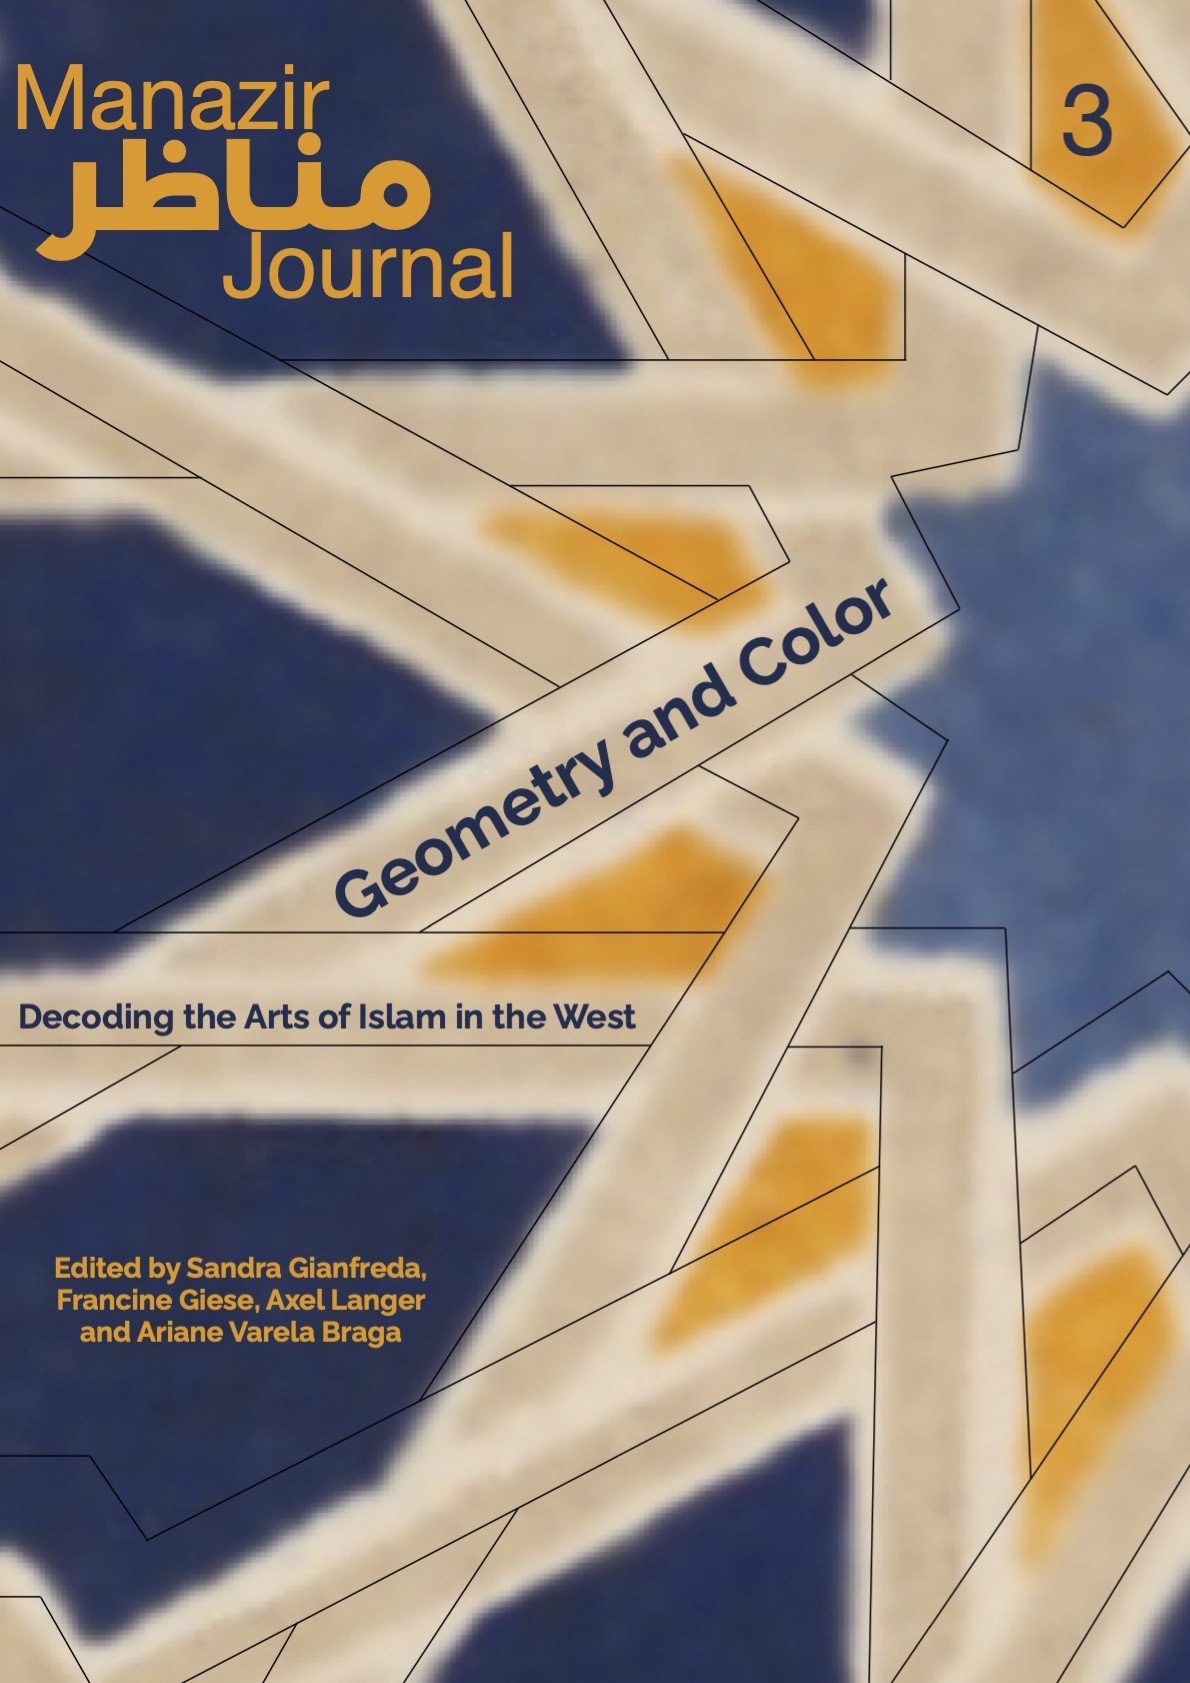 					View Vol. 3 (2021): Geometry and Color. Decoding the Arts of Islam in the West from the Mid-19th to the Early 20th Century
				